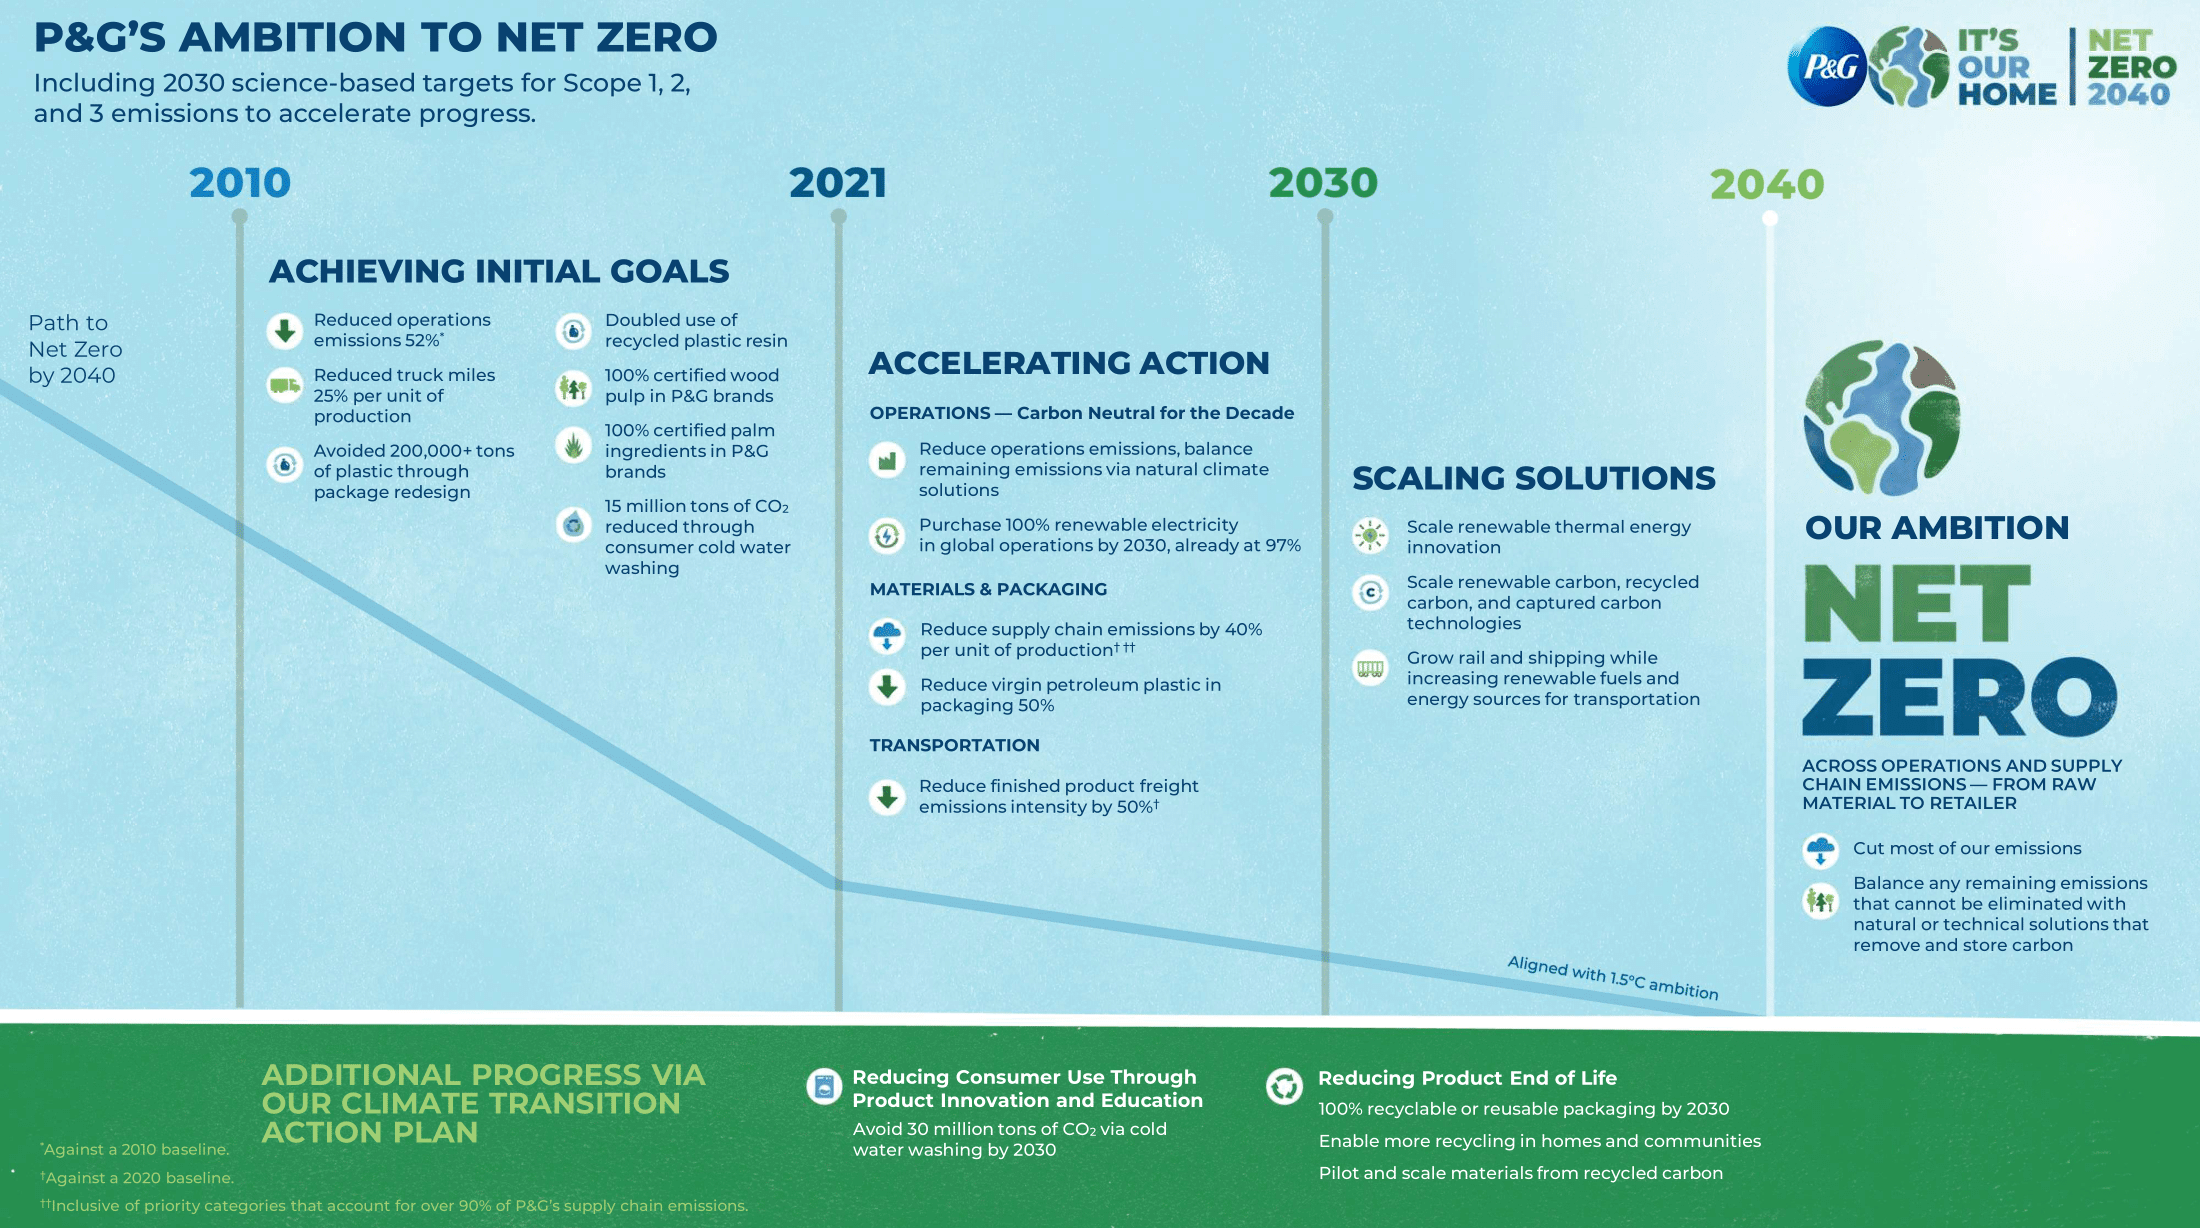 Green House Gas (GHG) Protocol - SustainabilityNet